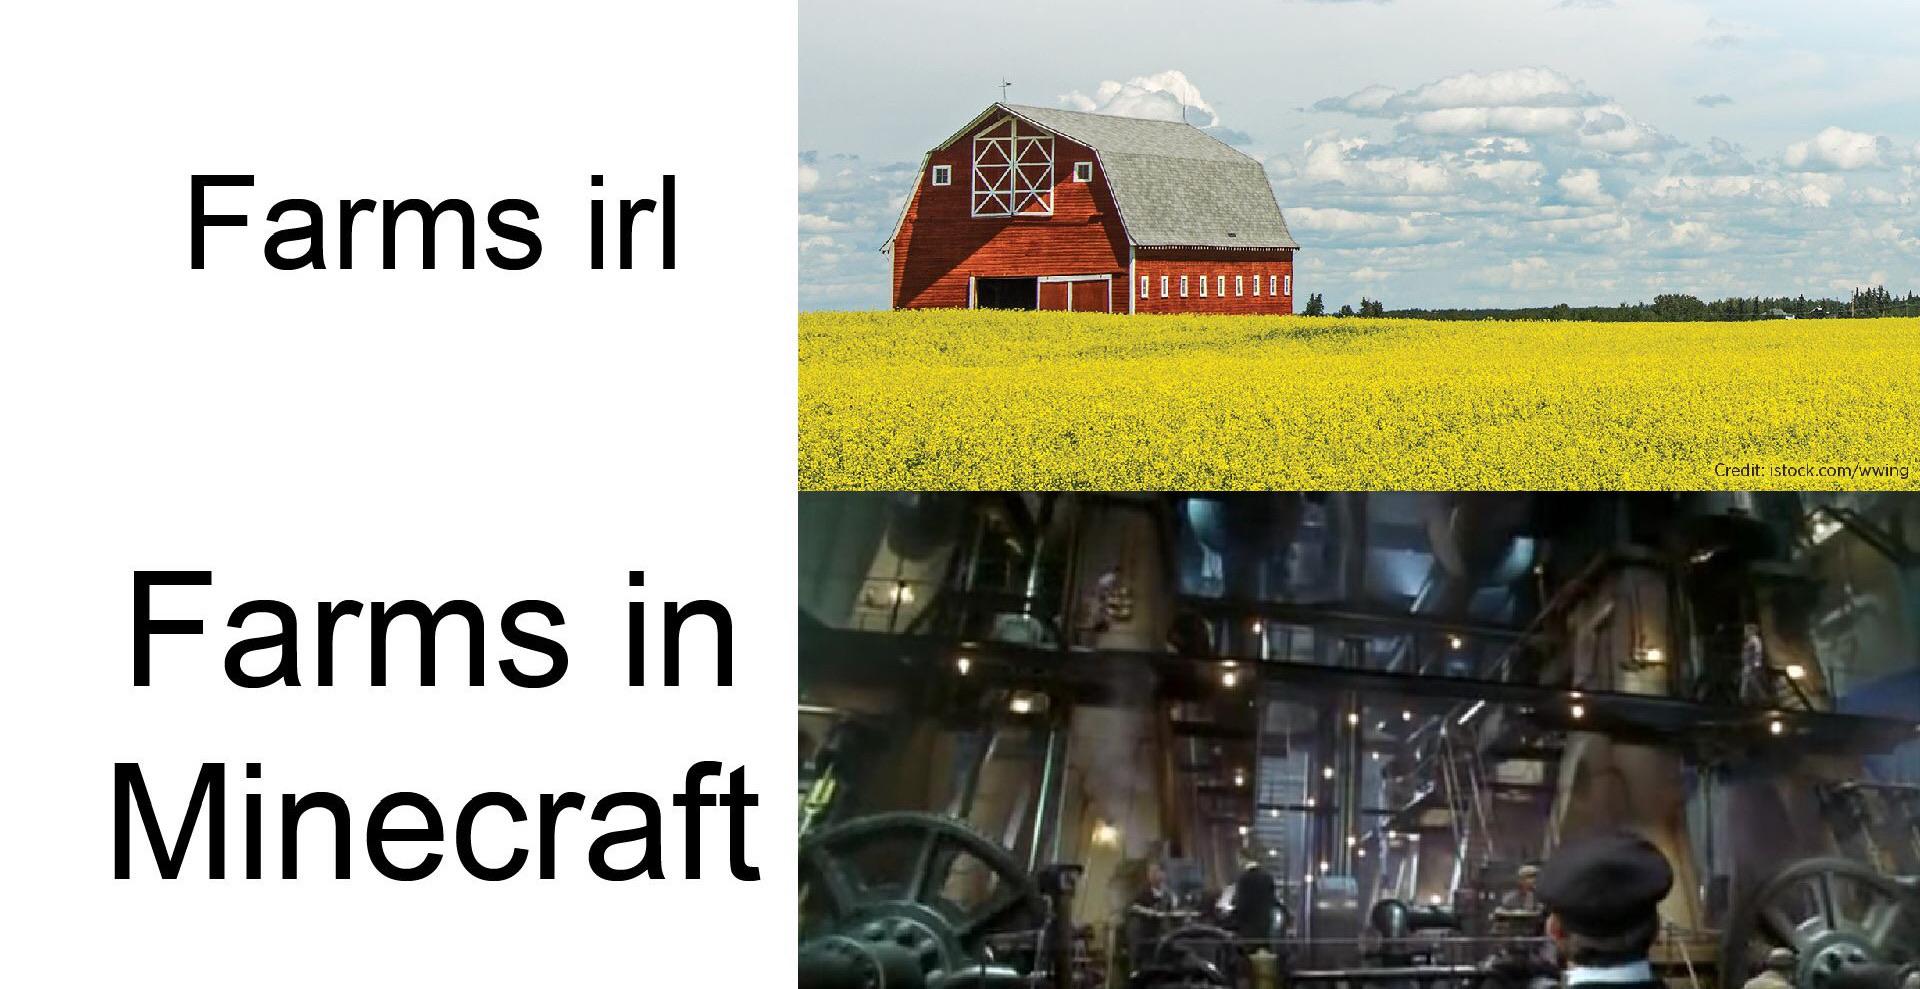 Minecraft, Imango minecraft memes Minecraft, Imango text: Farms irl Farms in Minecraft Credit: -istock.com/wwing 